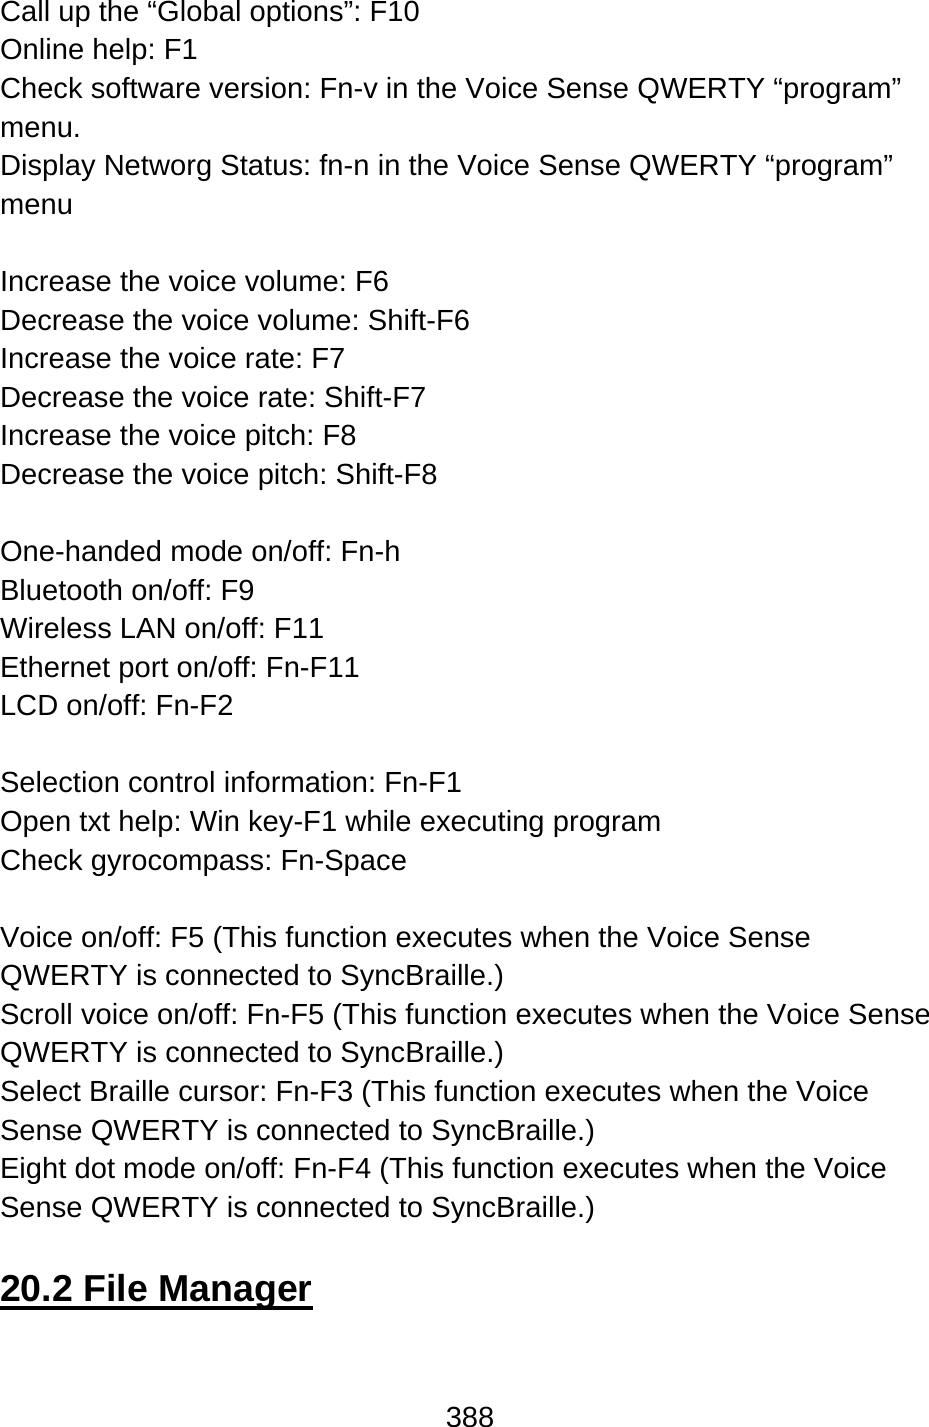 388  Call up the “Global options”: F10 Online help: F1 Check software version: Fn-v in the Voice Sense QWERTY “program” menu. Display Networg Status: fn-n in the Voice Sense QWERTY “program” menu  Increase the voice volume: F6 Decrease the voice volume: Shift-F6 Increase the voice rate: F7 Decrease the voice rate: Shift-F7 Increase the voice pitch: F8 Decrease the voice pitch: Shift-F8  One-handed mode on/off: Fn-h Bluetooth on/off: F9 Wireless LAN on/off: F11 Ethernet port on/off: Fn-F11 LCD on/off: Fn-F2  Selection control information: Fn-F1 Open txt help: Win key-F1 while executing program Check gyrocompass: Fn-Space  Voice on/off: F5 (This function executes when the Voice Sense QWERTY is connected to SyncBraille.) Scroll voice on/off: Fn-F5 (This function executes when the Voice Sense QWERTY is connected to SyncBraille.) Select Braille cursor: Fn-F3 (This function executes when the Voice Sense QWERTY is connected to SyncBraille.) Eight dot mode on/off: Fn-F4 (This function executes when the Voice Sense QWERTY is connected to SyncBraille.)  20.2 File Manager  